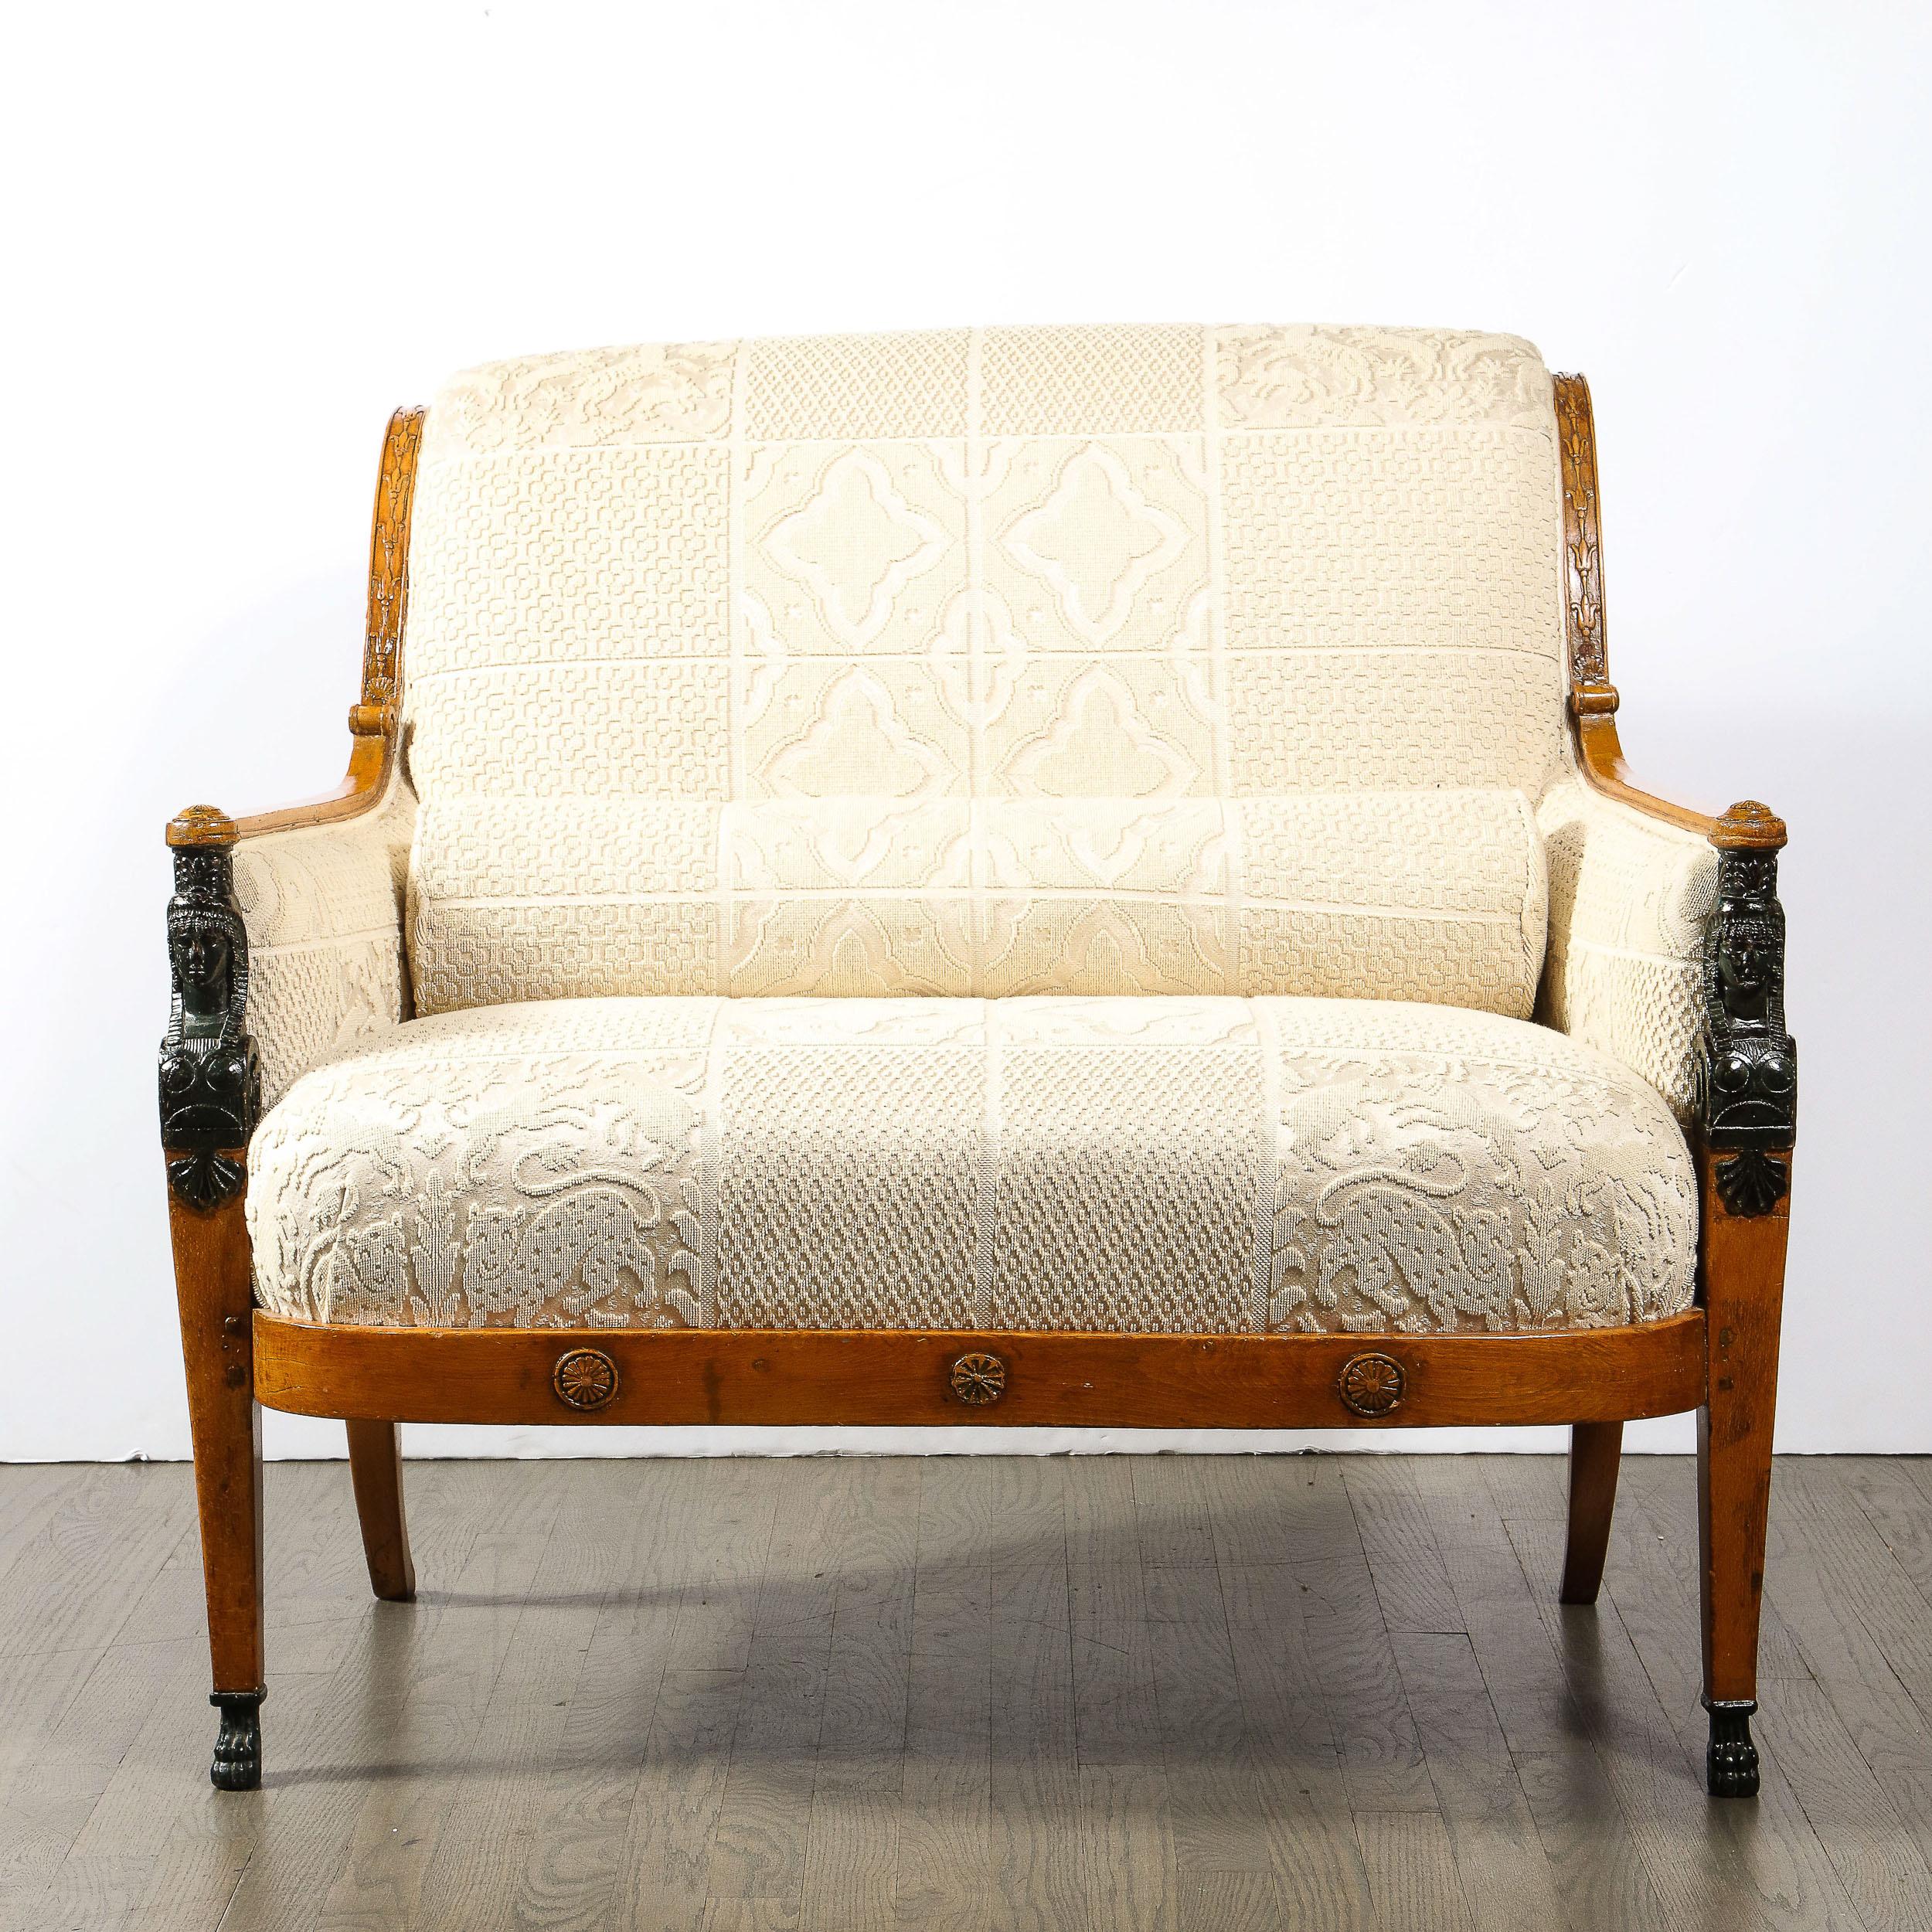 This stunningly formed Biedermeier Settee with Scroll Form Back & Saber Supports in Beachwood with Neoclassical Detailing originates from France, Circa 1840. Features a beautifully reserved geometric composition adorned with subtle carved detailing